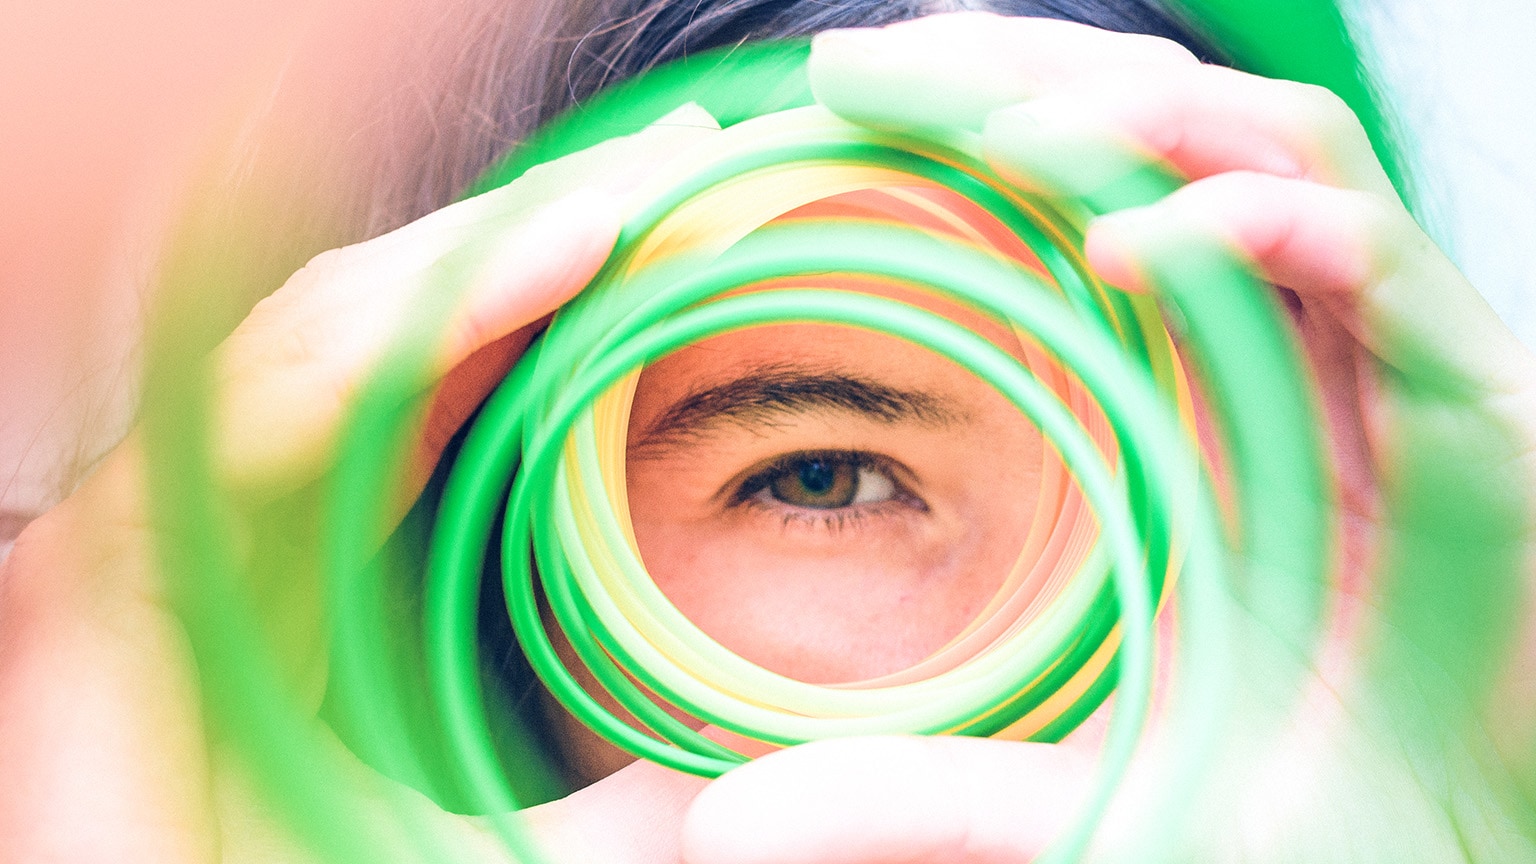 Close-up image of a person looking through a series of circles like its a tube with one eye.